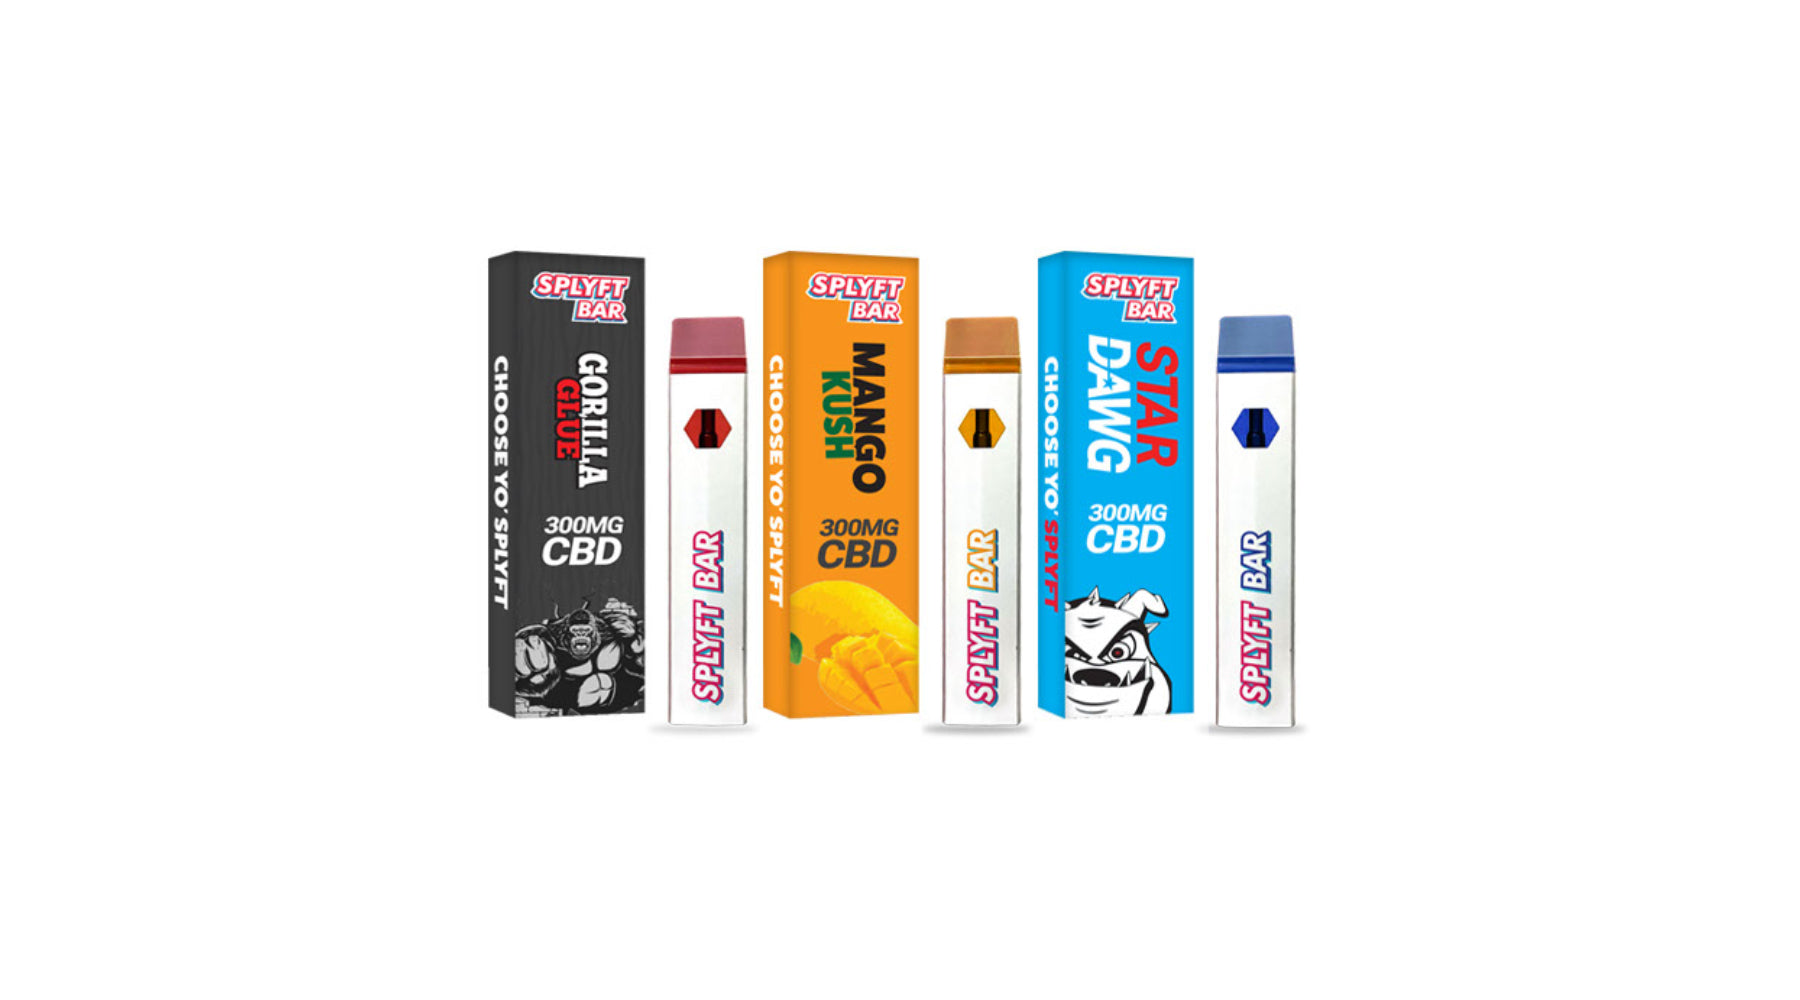 Product Of The Month: SPLYFT BAR 300mg CBD Disposable Vapes